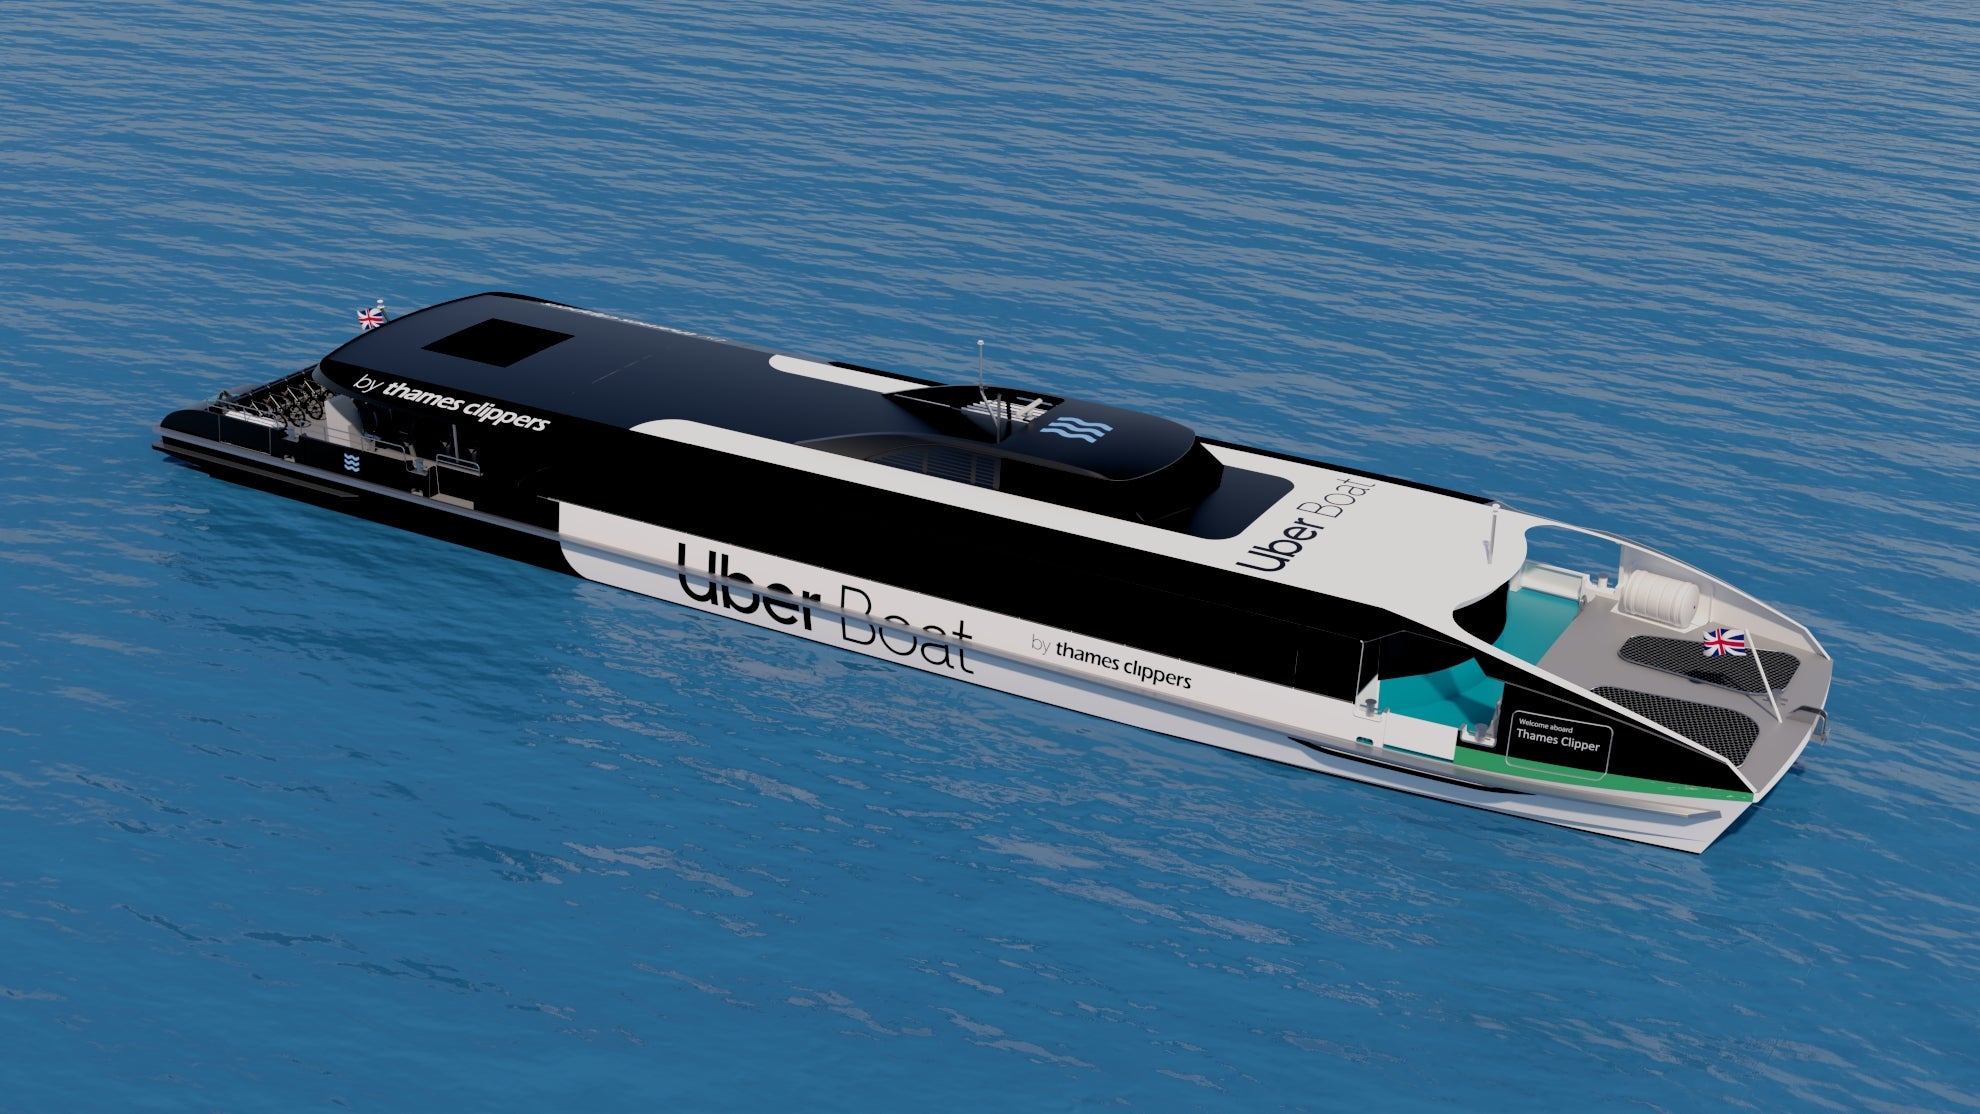 The UK’s first hybrid high-speed passenger ferries are being built to cut emissions on commuter services in London (Uber Boat by Thames Clippers/PA)